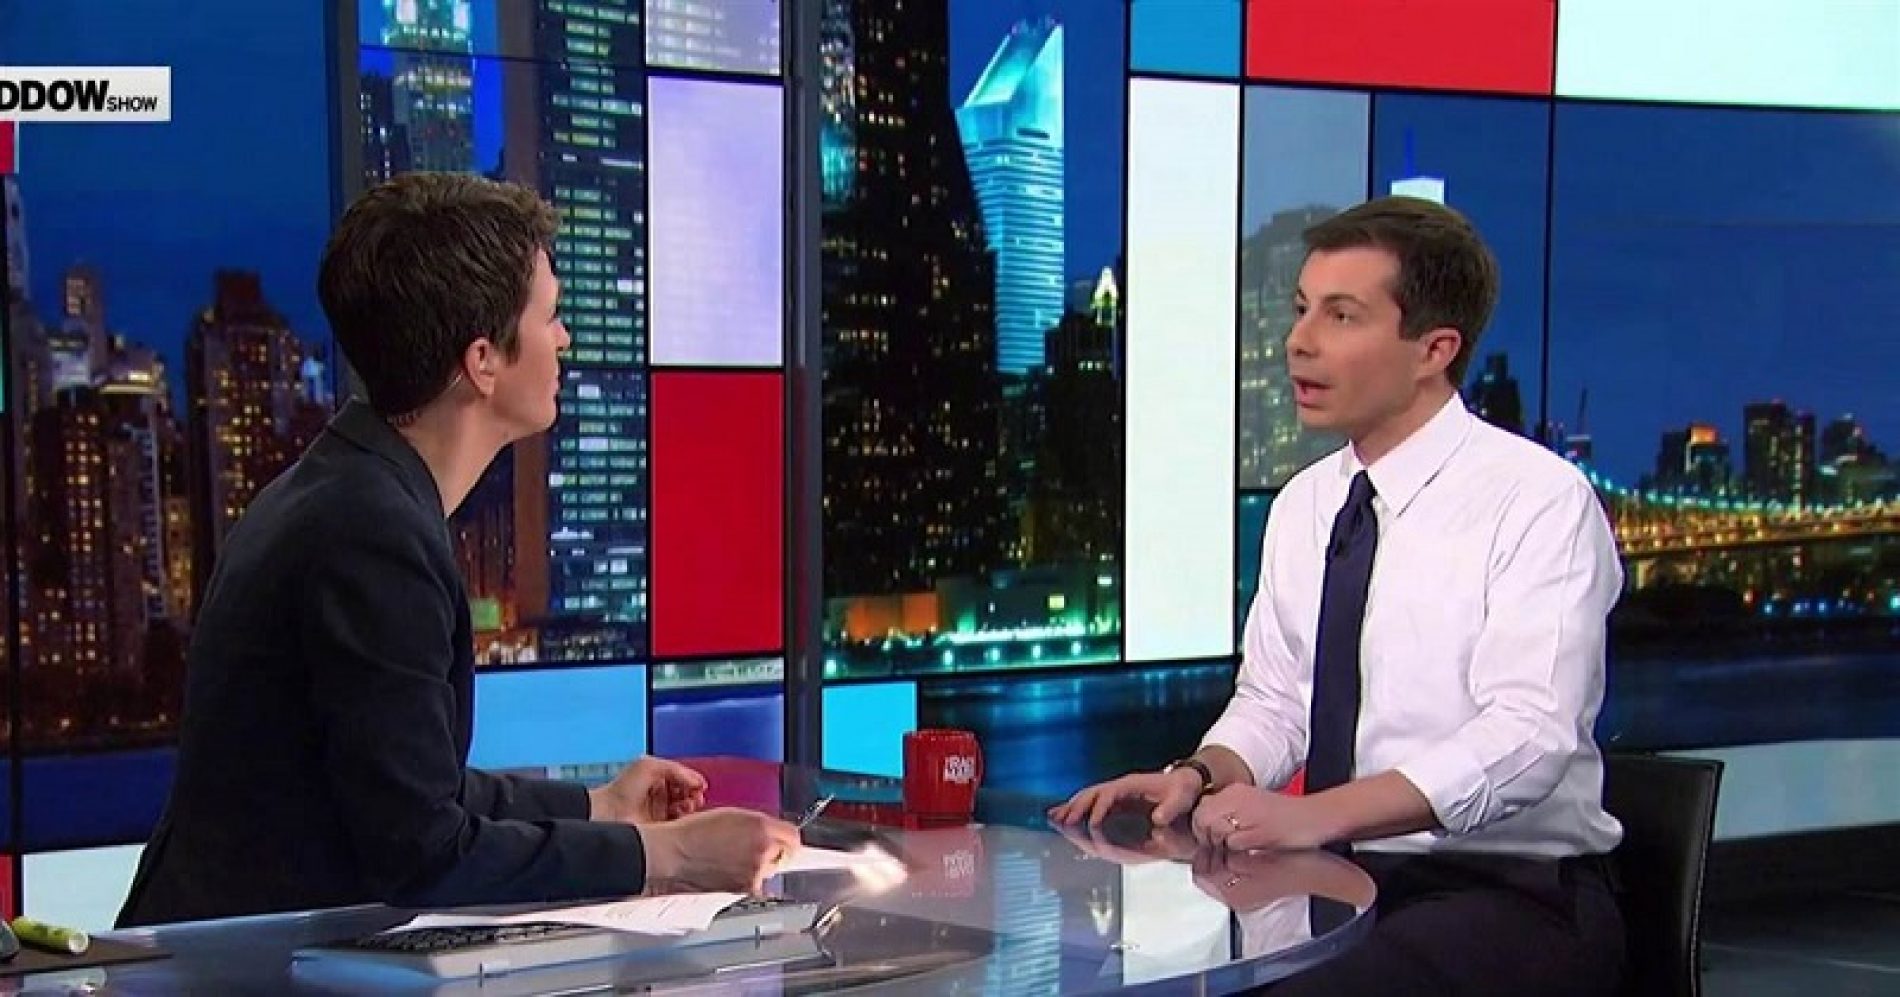 Pete Buttigieg and Rachel Maddow talk about coming out during moving interview